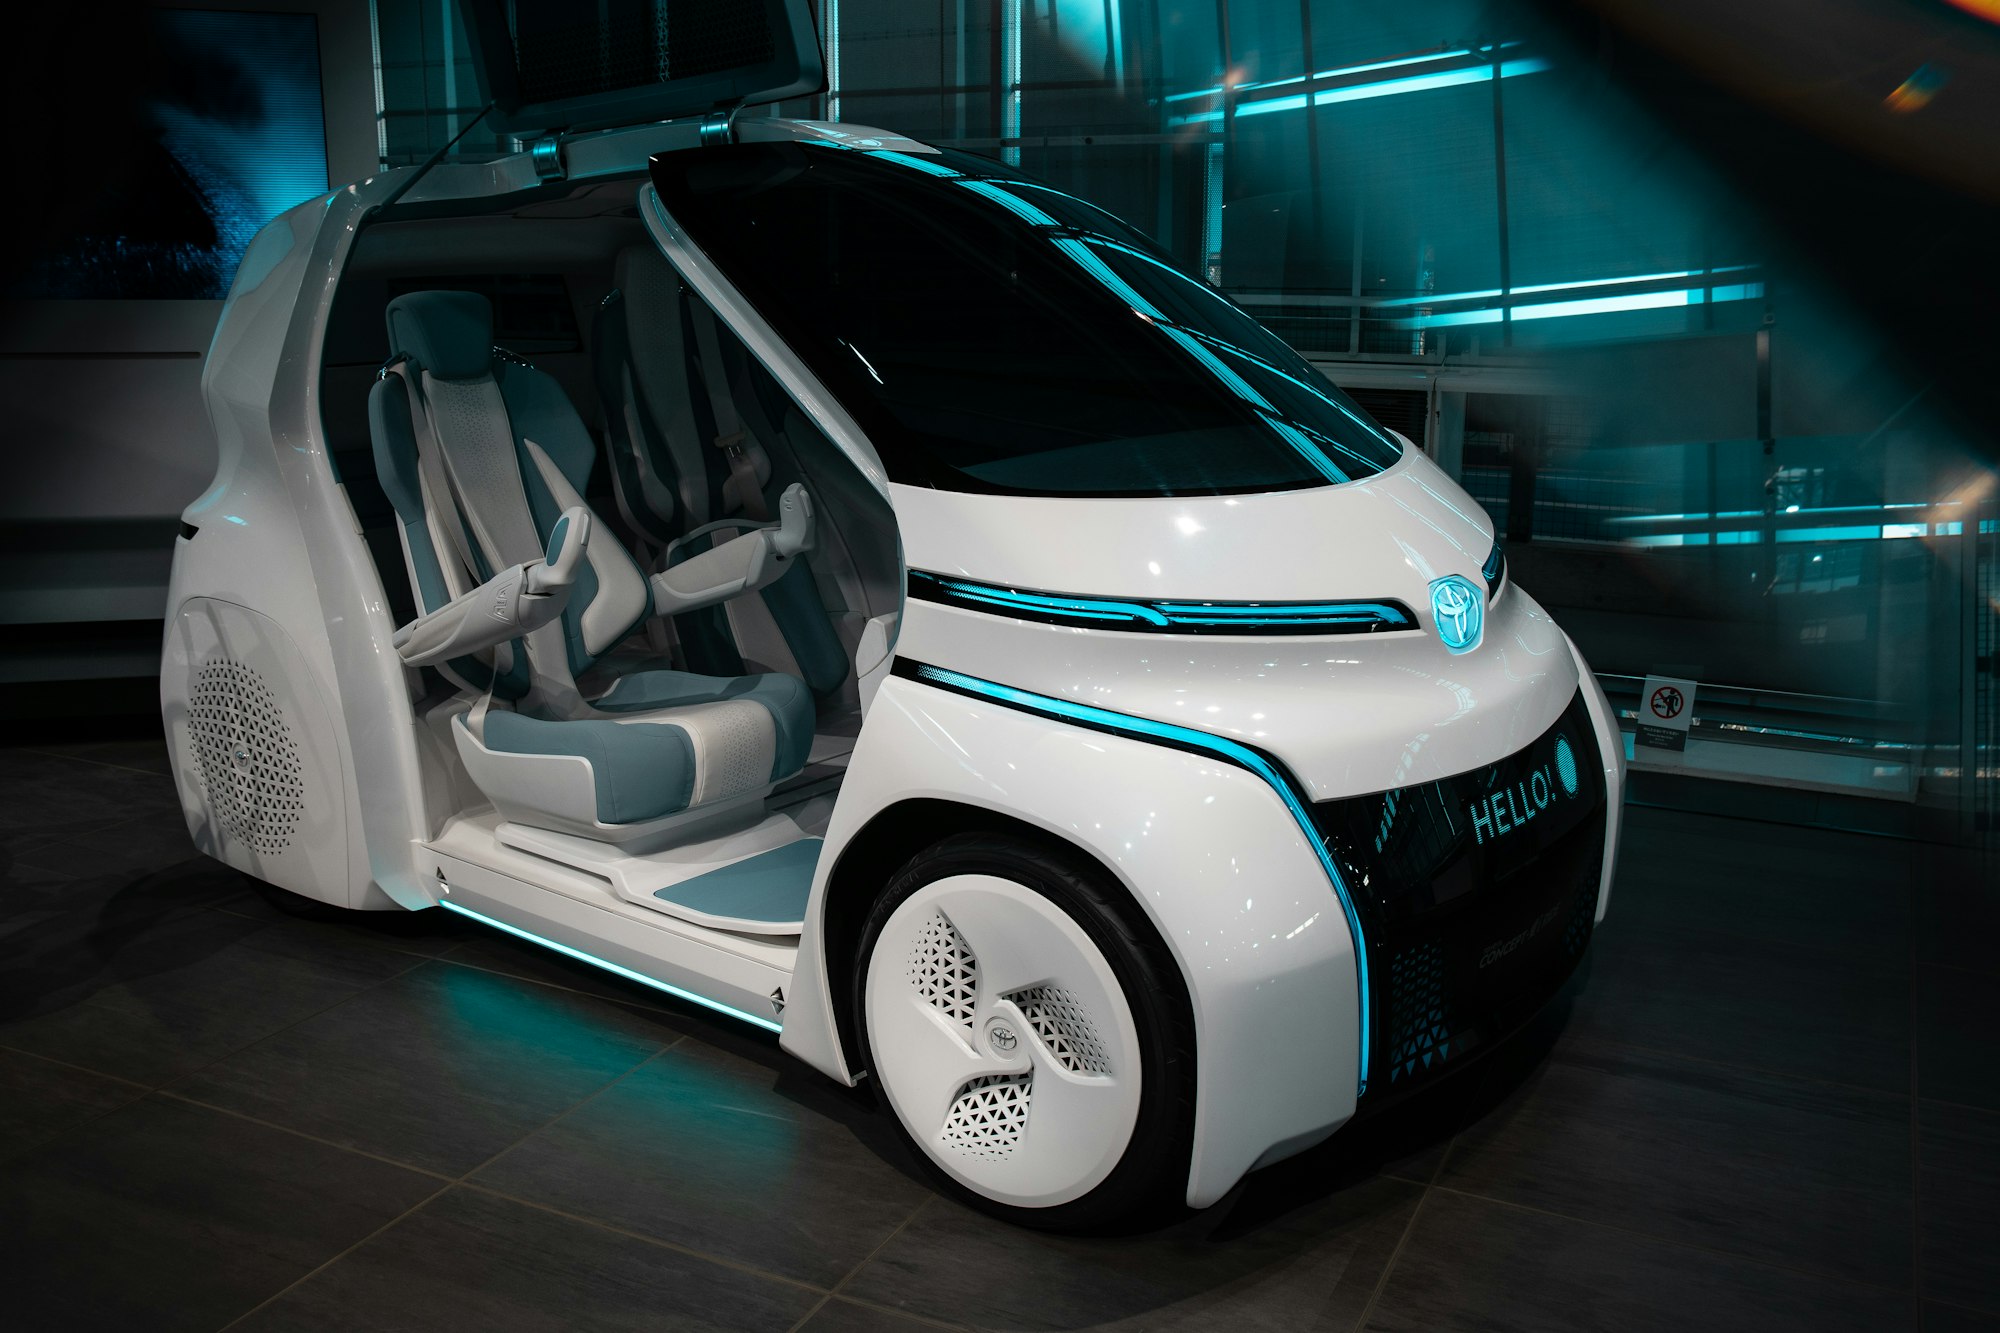 Toyota displays its new car concept at an exhibition about future mobility, electric and fuell cell cars